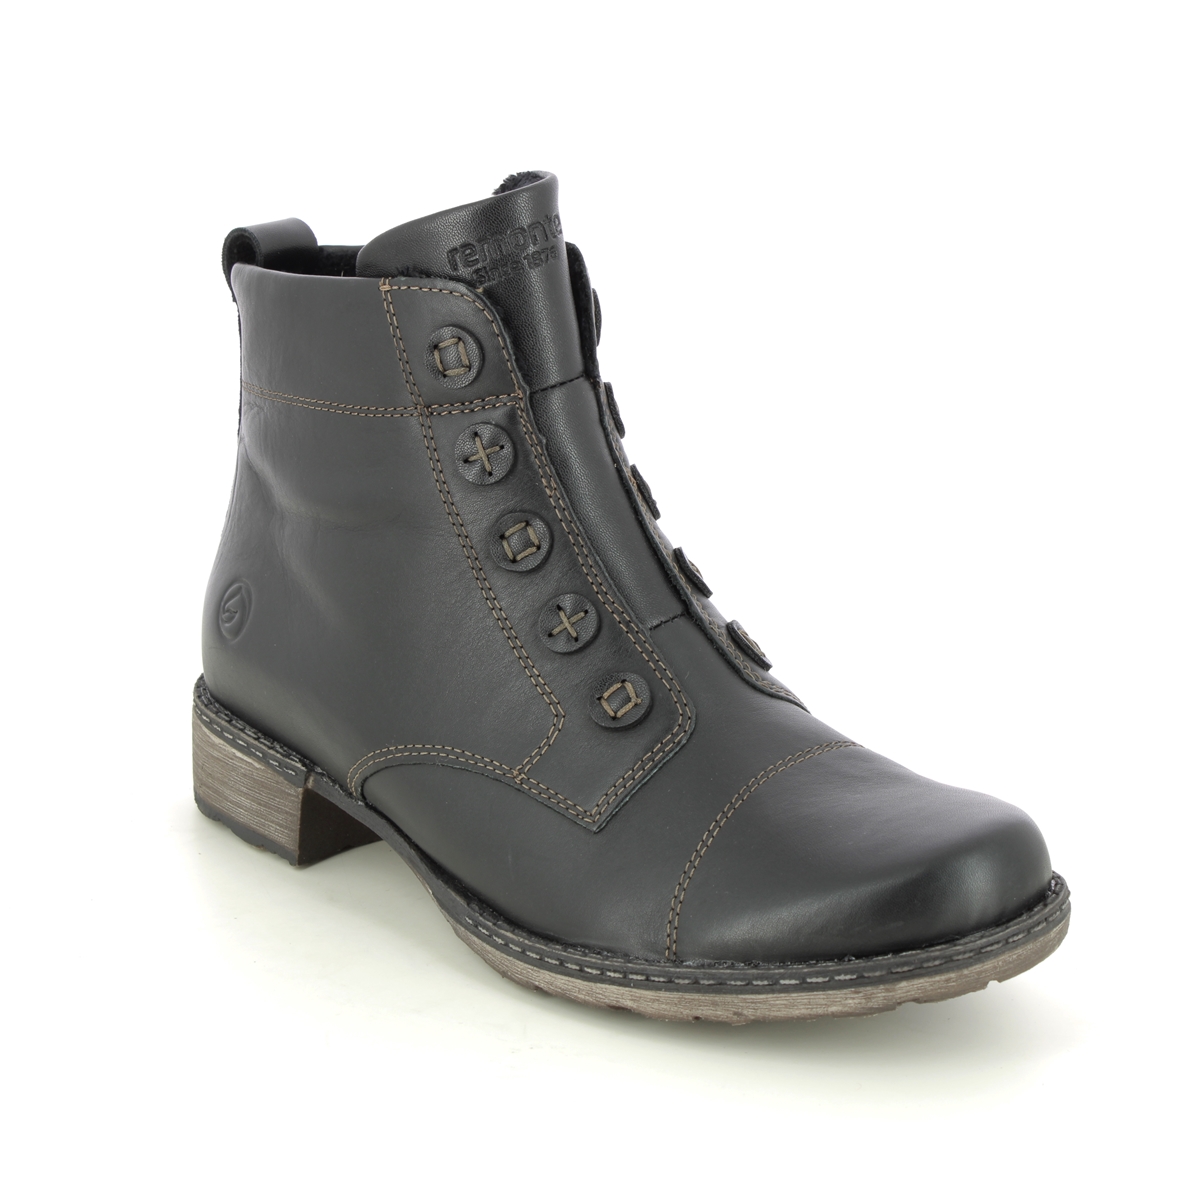 Remonte Peesibut Black Leather Womens Ankle Boots D4392-01 In Size 37 In Plain Black Leather